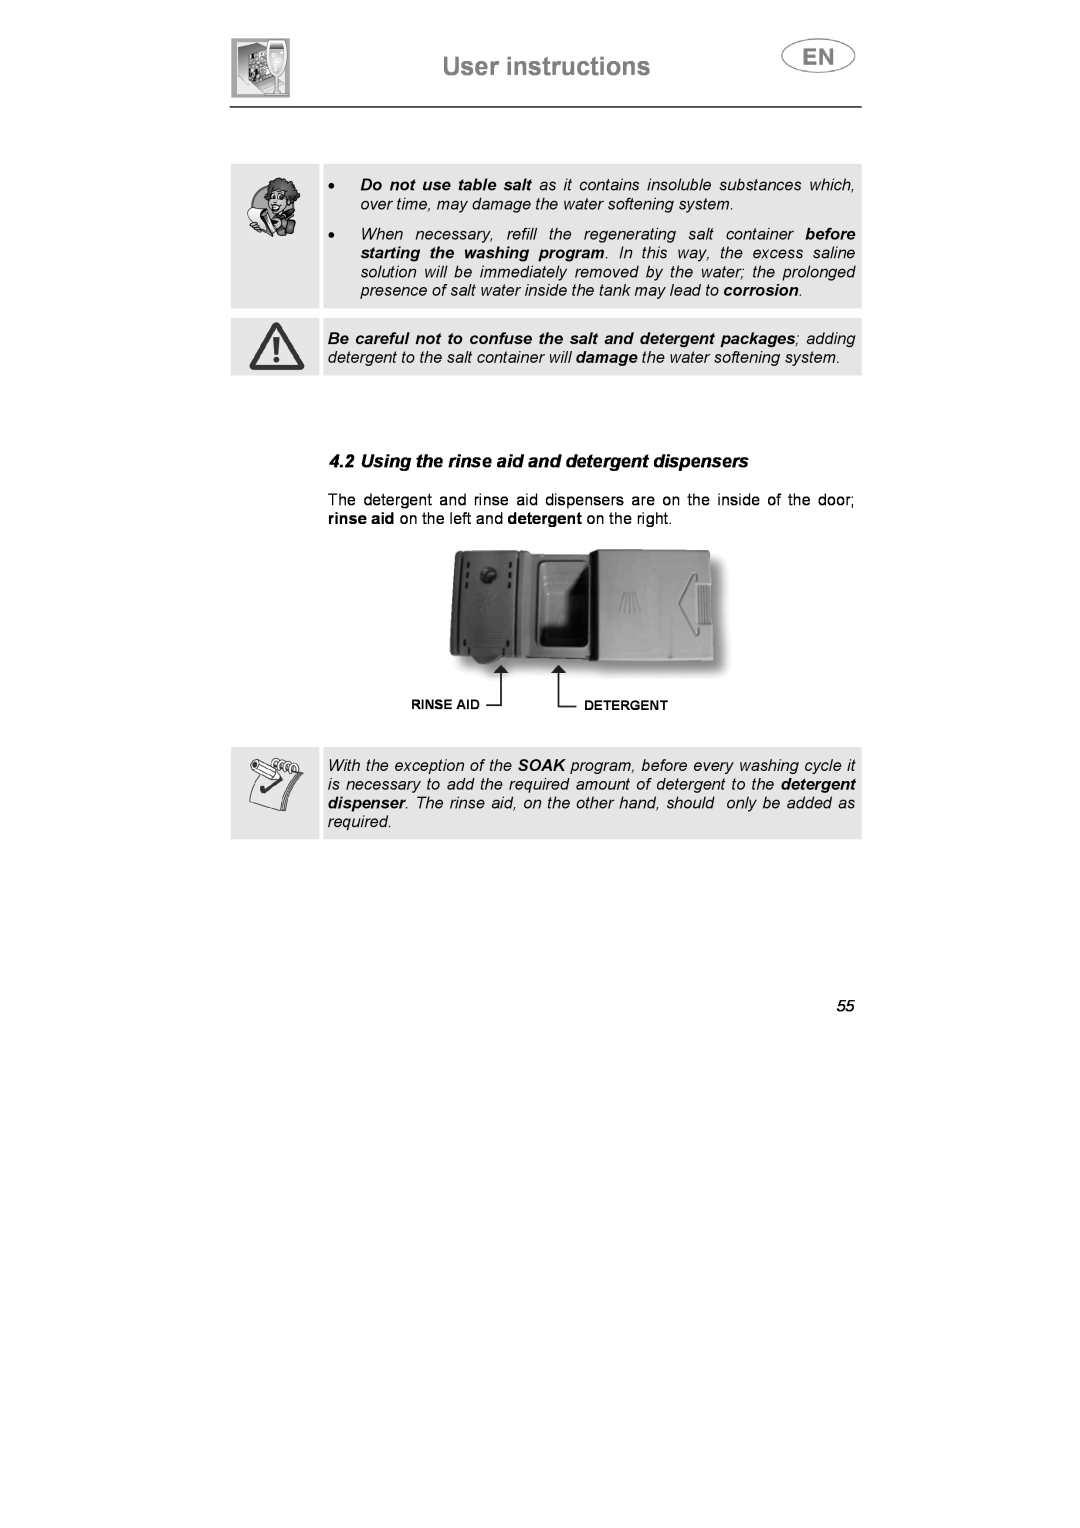 Smeg ST0904 instruction manual Using the rinse aid and detergent dispensers, User instructions, Rinse Aid, Detergent 